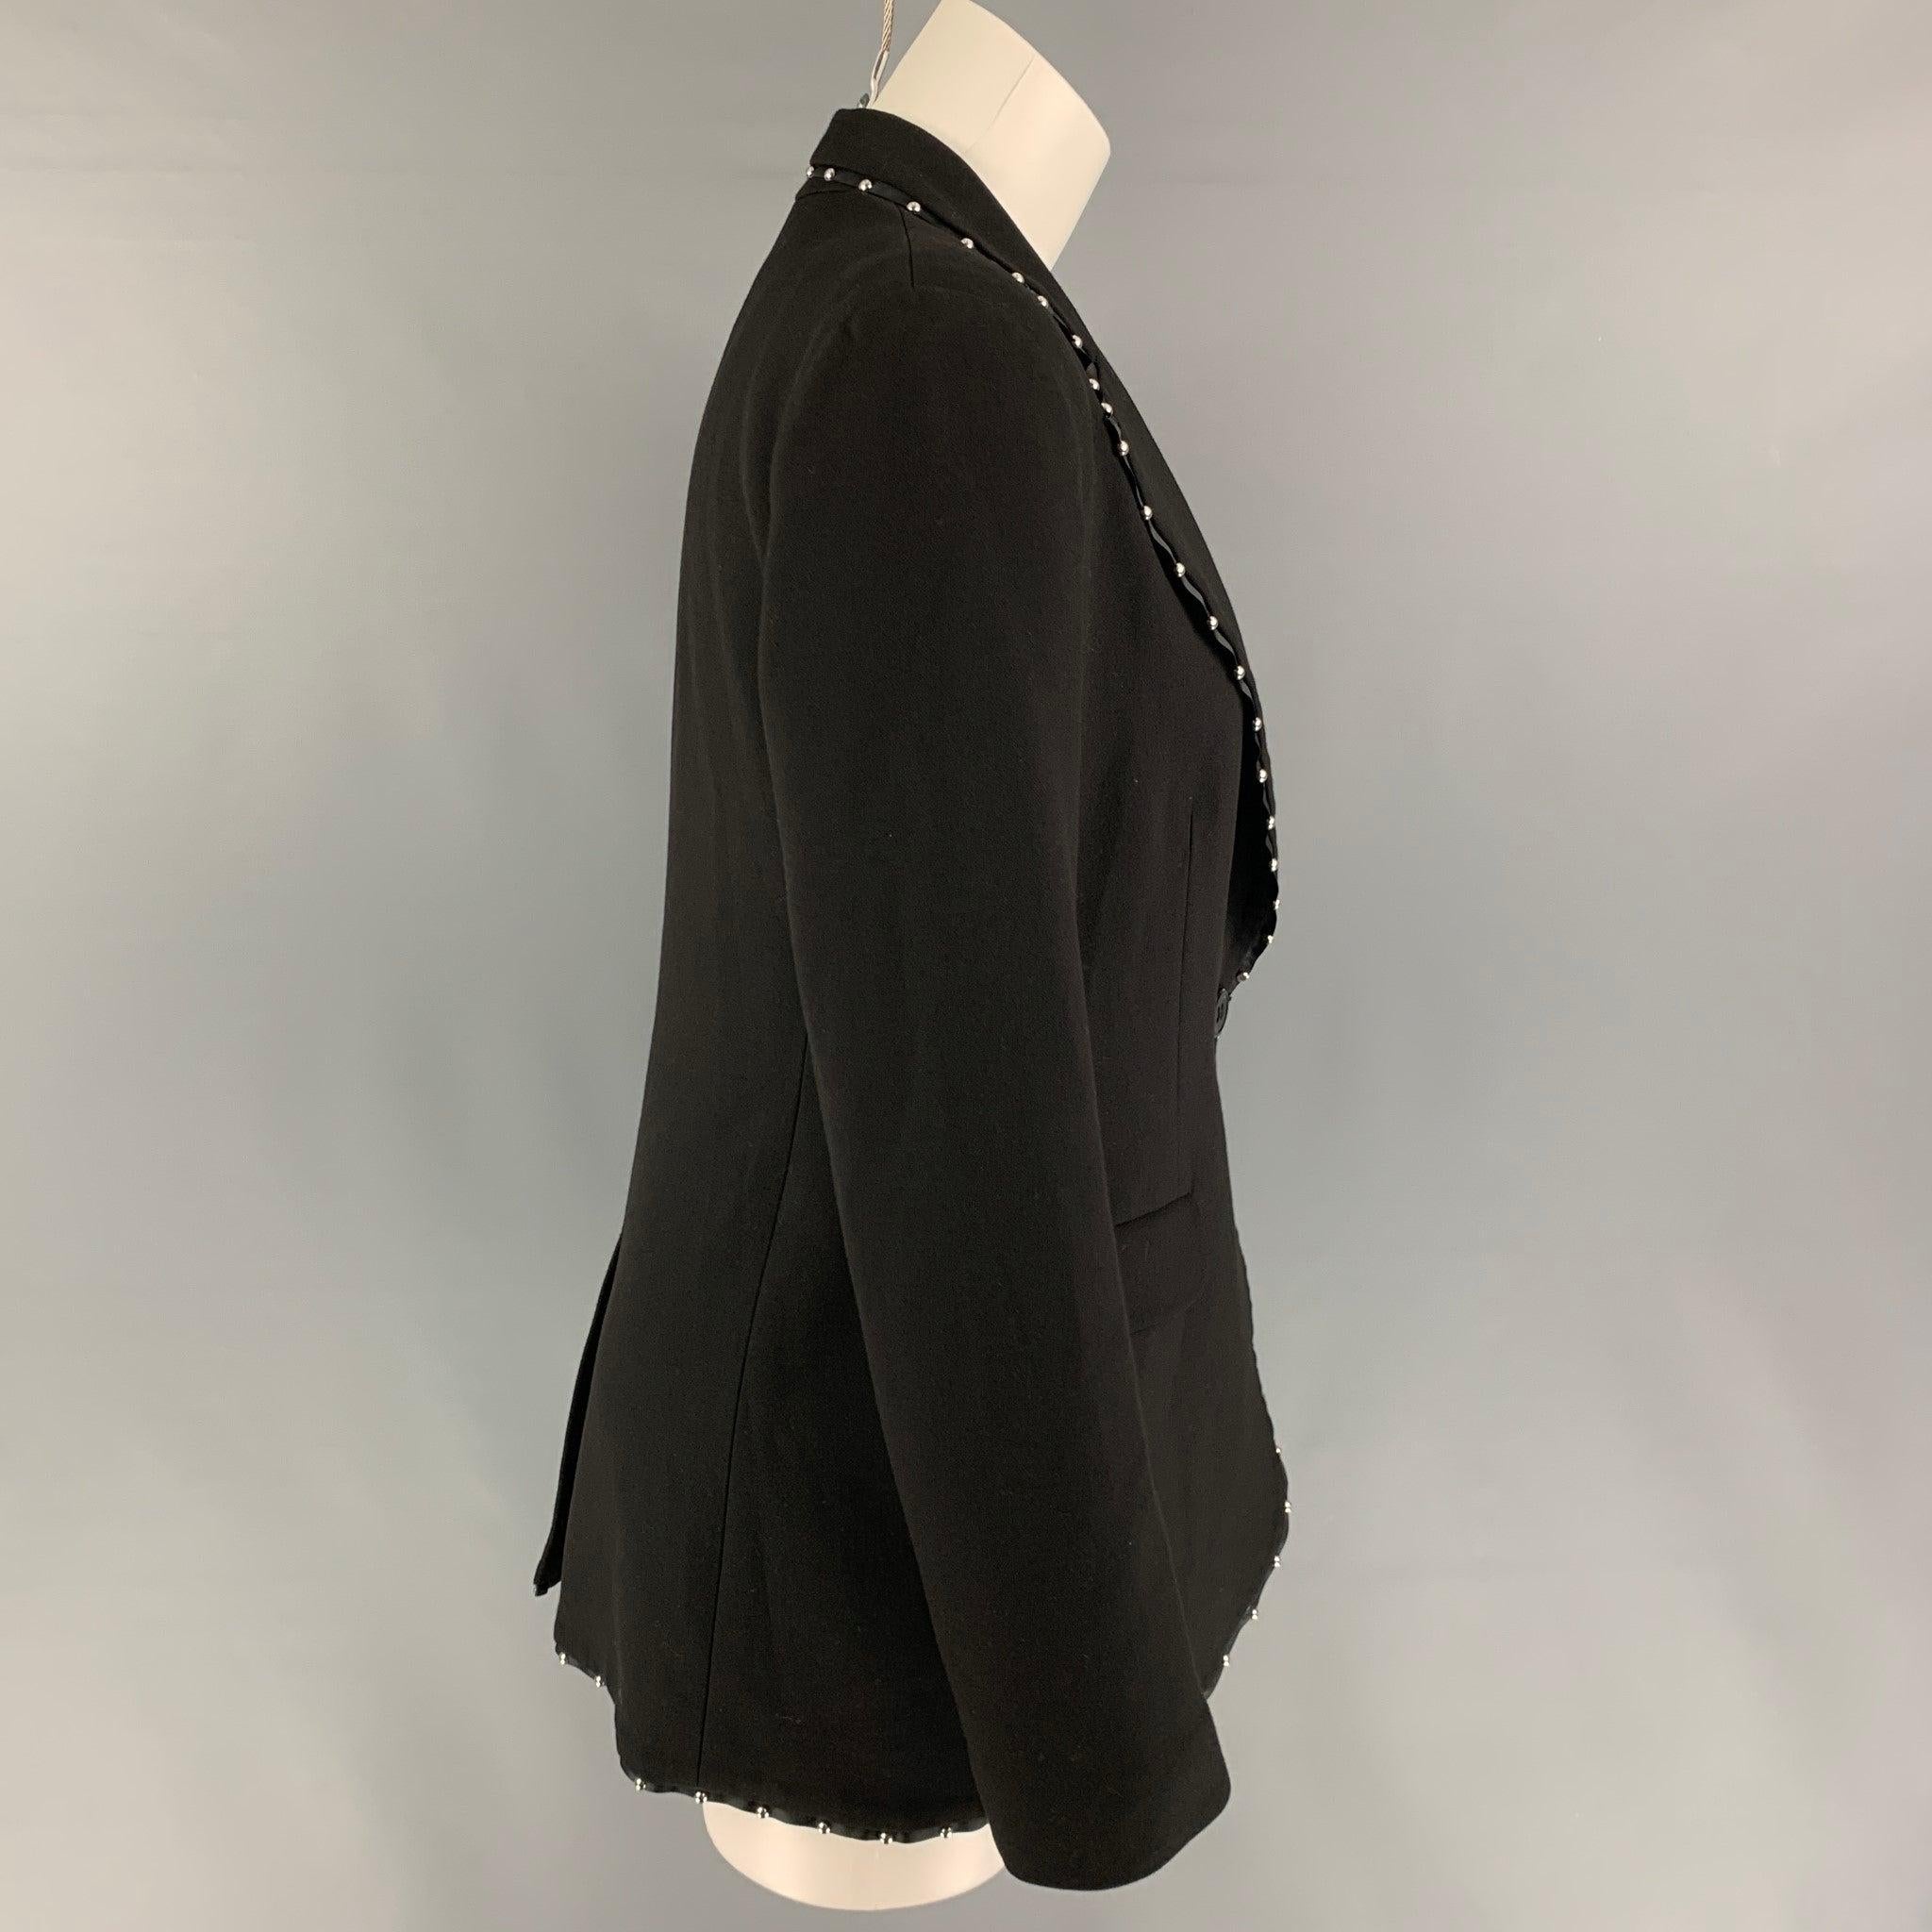 EMPORIO ARMANI jacket comes in a black wool blend with a full liner featuring a notch lapel, studded details, flap pockets, single back vent, and a single button closure.
Very Good
Pre-Owned Condition. 

Marked:   Size tag removed. 

Measurements: 
